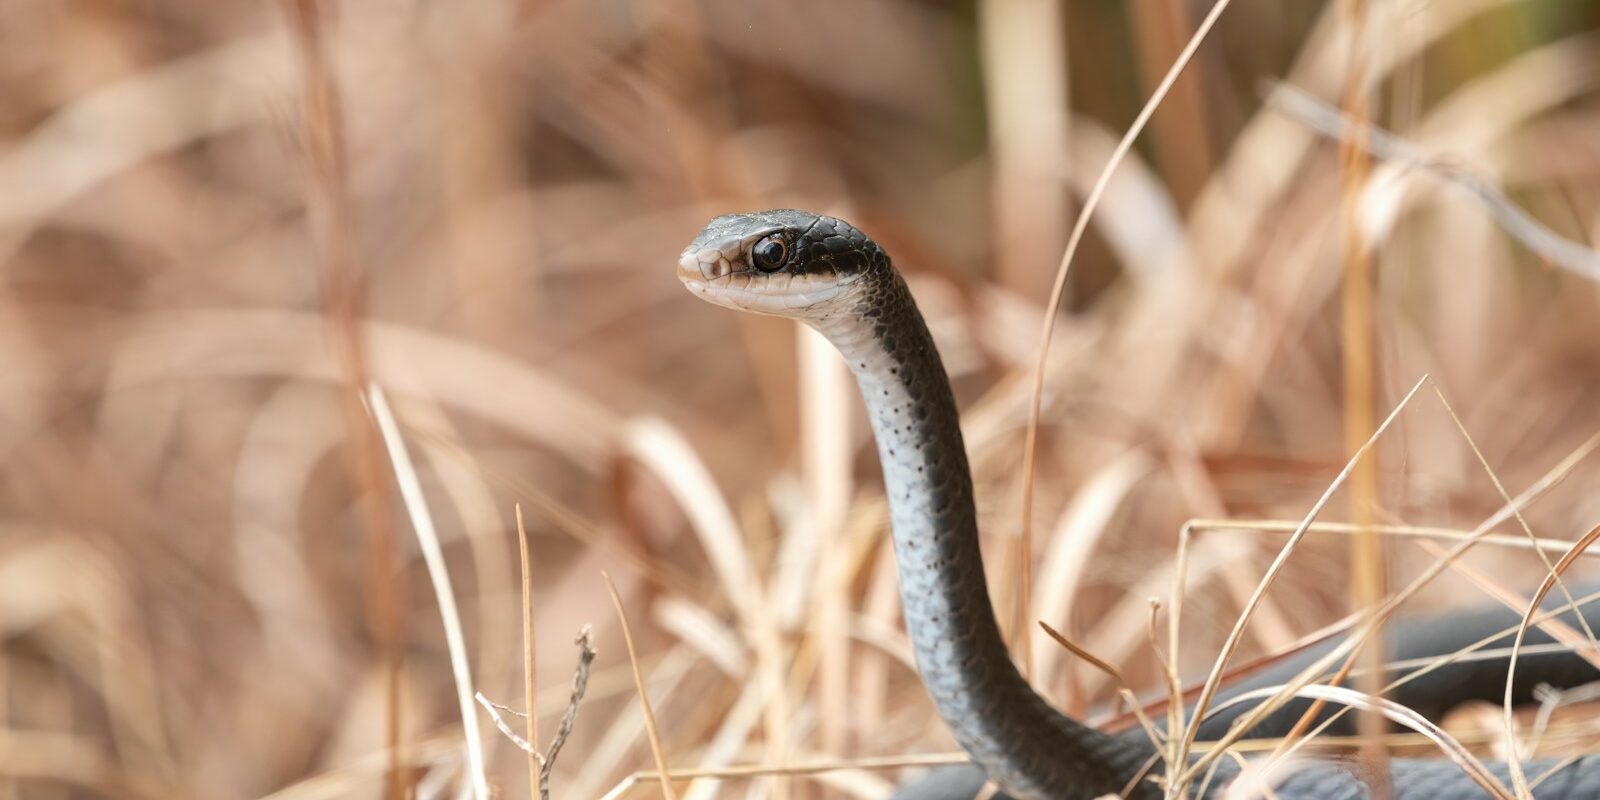 a close up of a snake in the grass